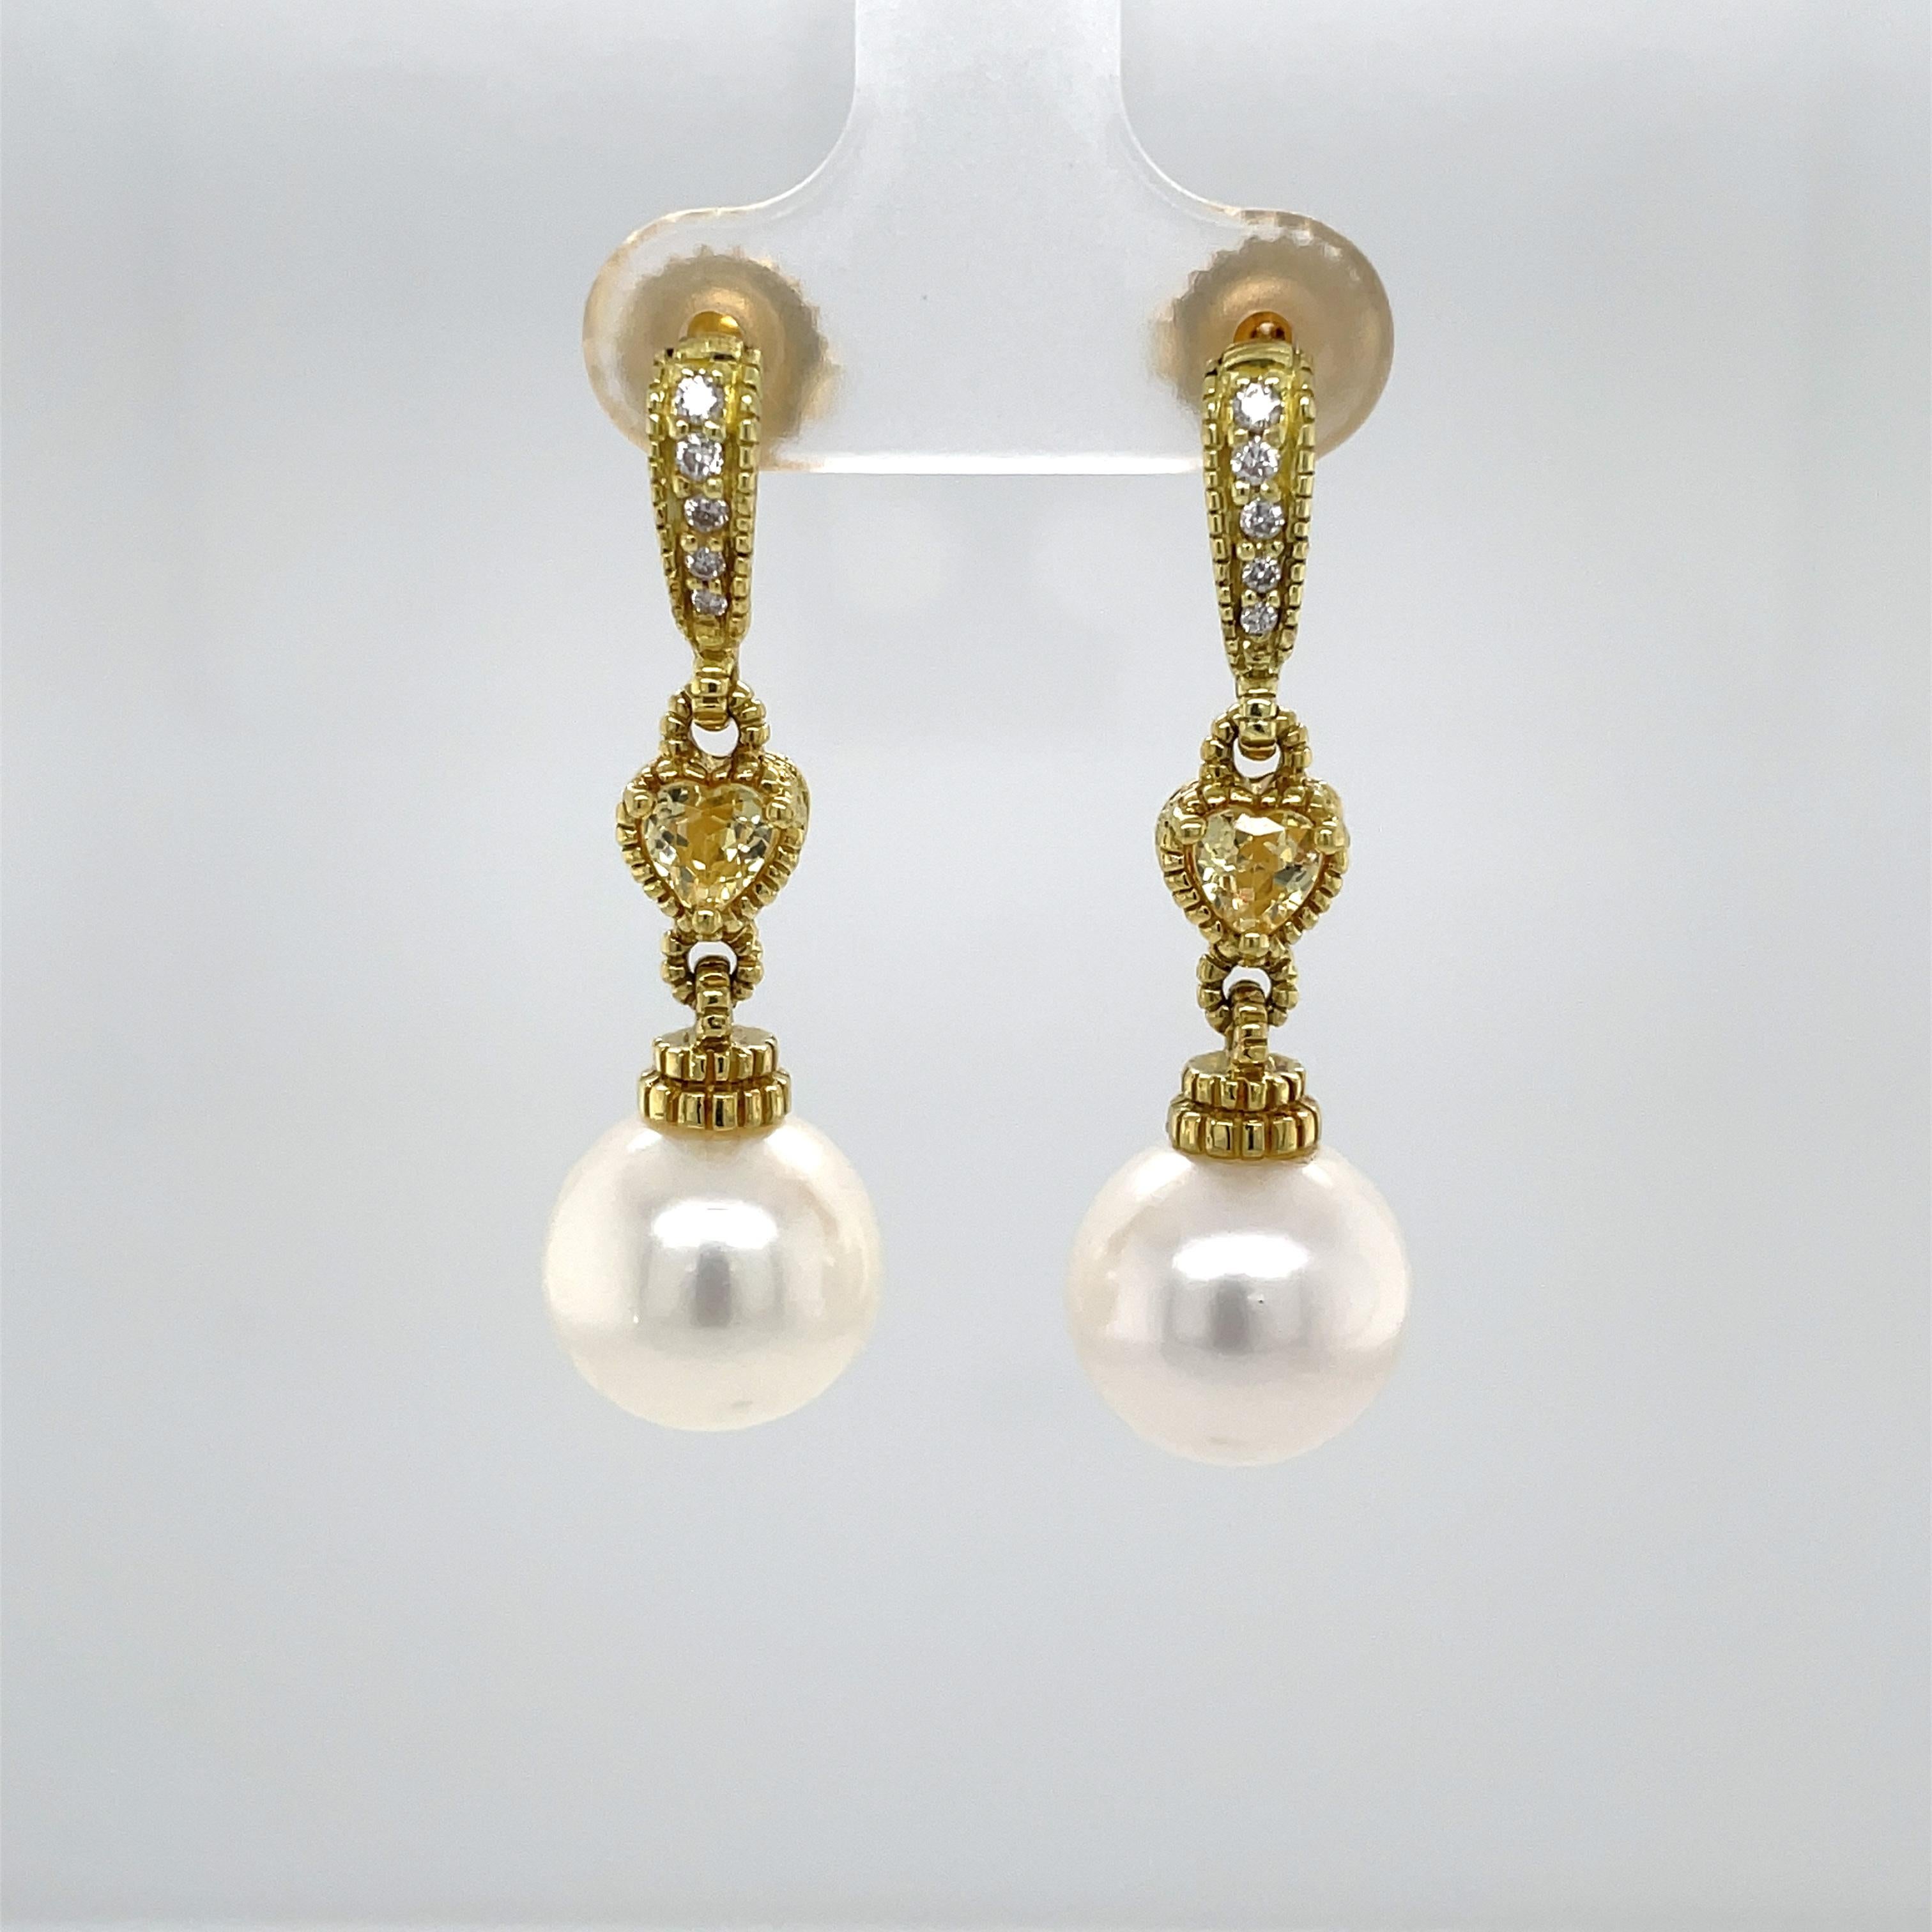 Round Cut Judith Ripka 18K Yellow Gold Pearl Drop Earrings with Diamond Citrine Accents